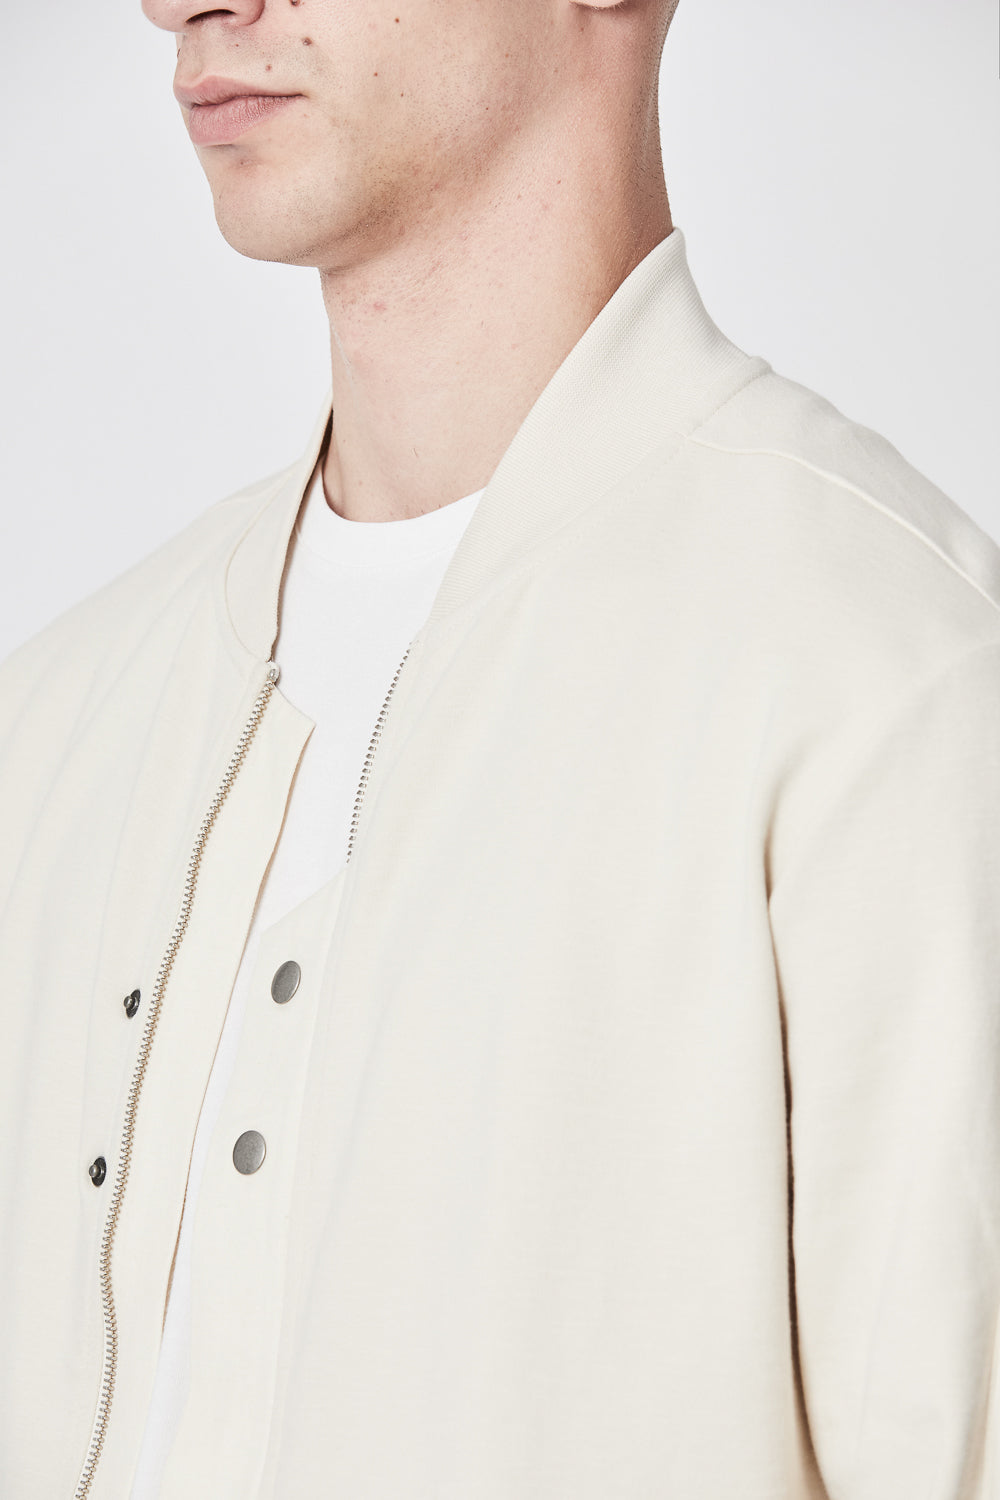 Buy the Thom Krom M SJ 588 Jacket in Ivory at Intro. Spend £50 for free UK delivery. Official stockists. We ship worldwide.